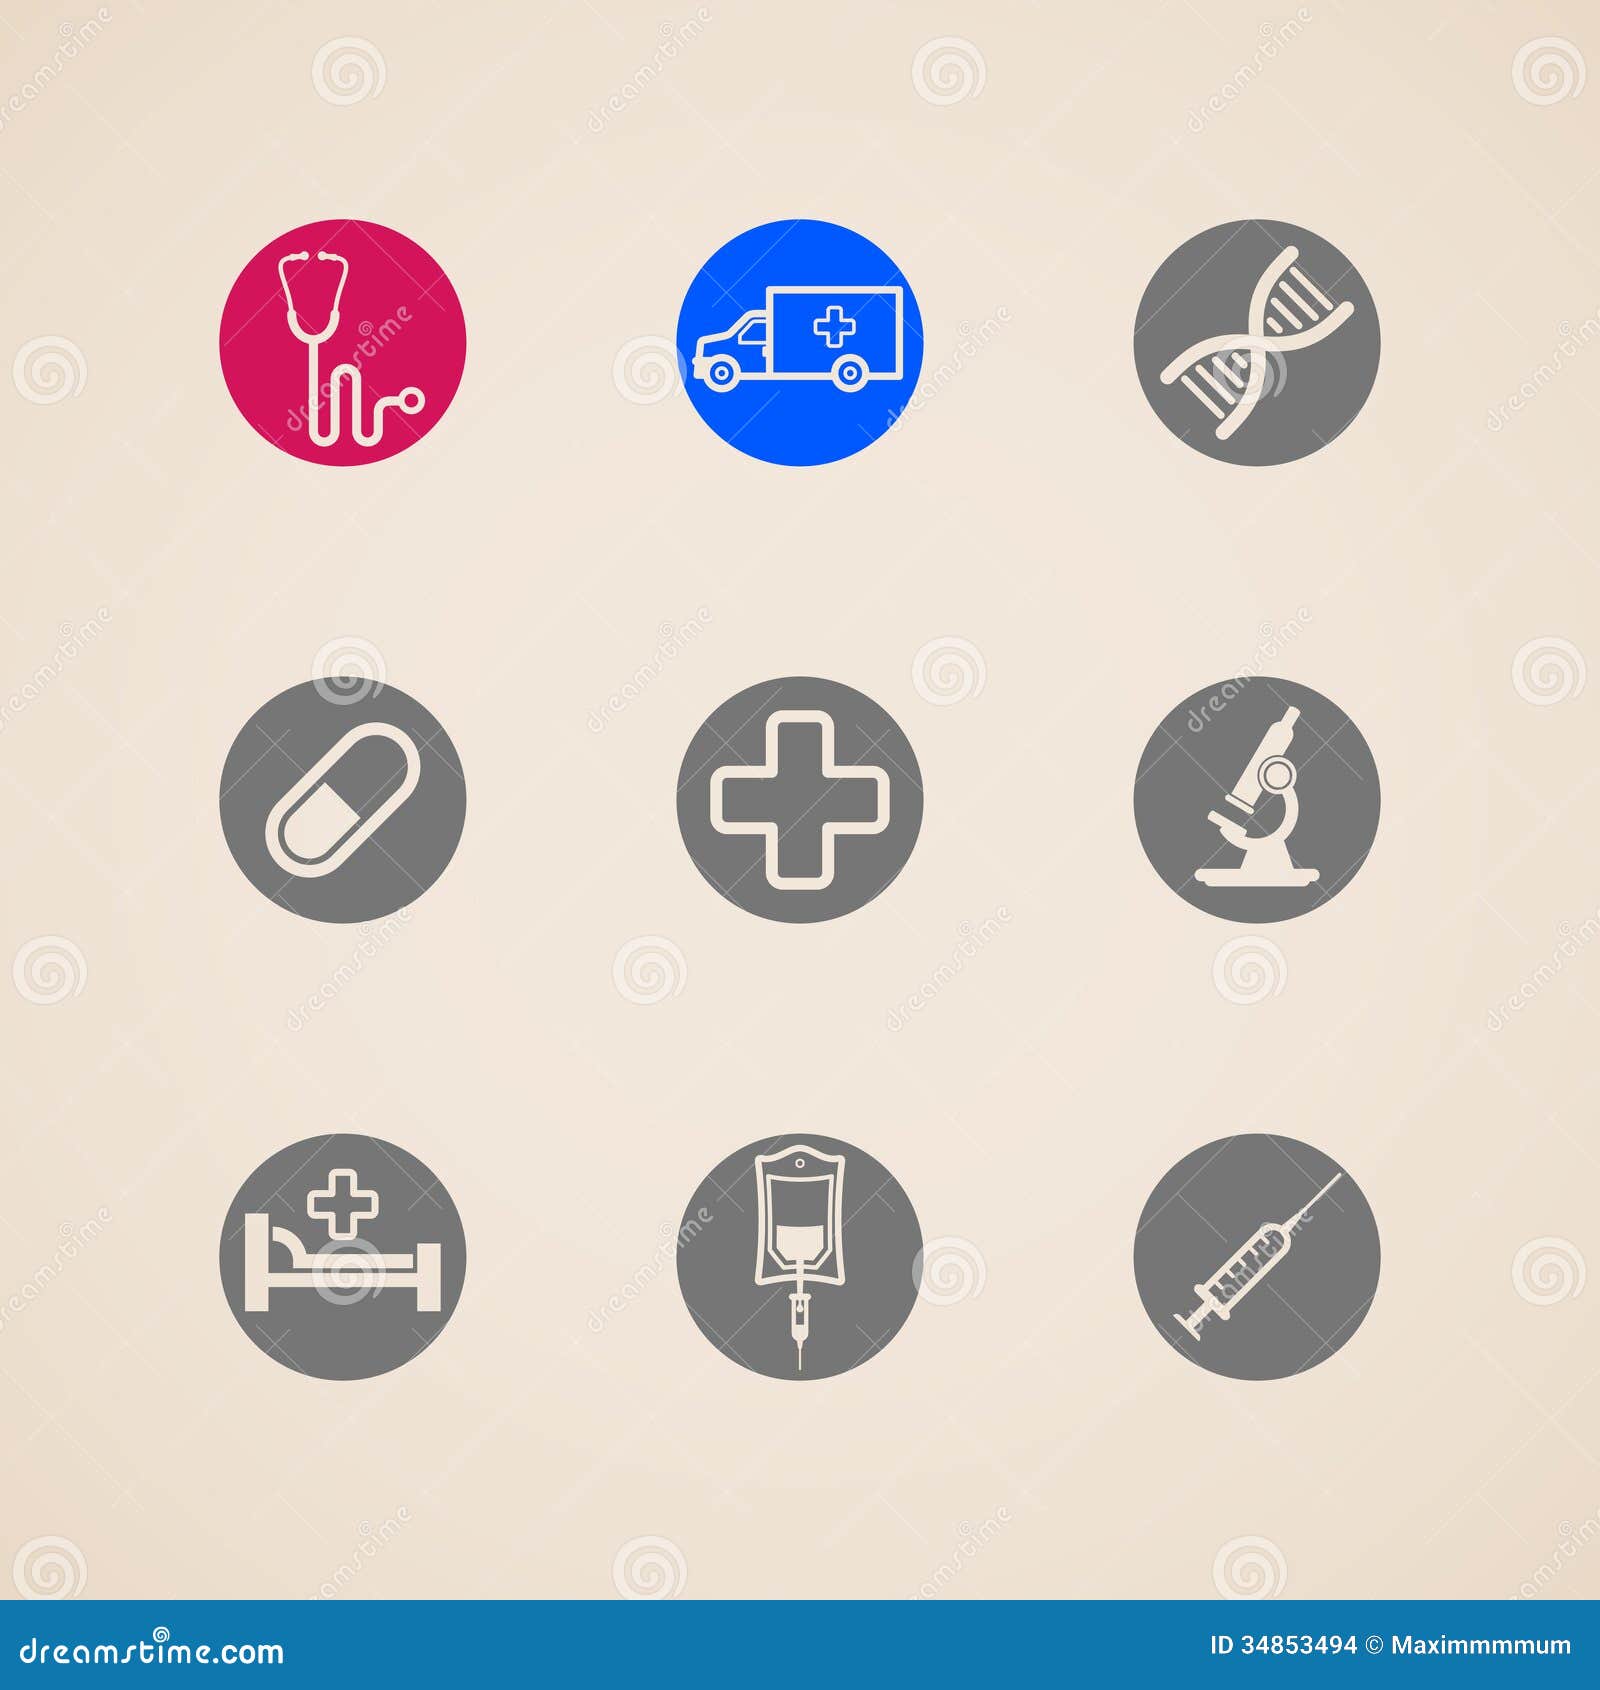 set of icons with medical items